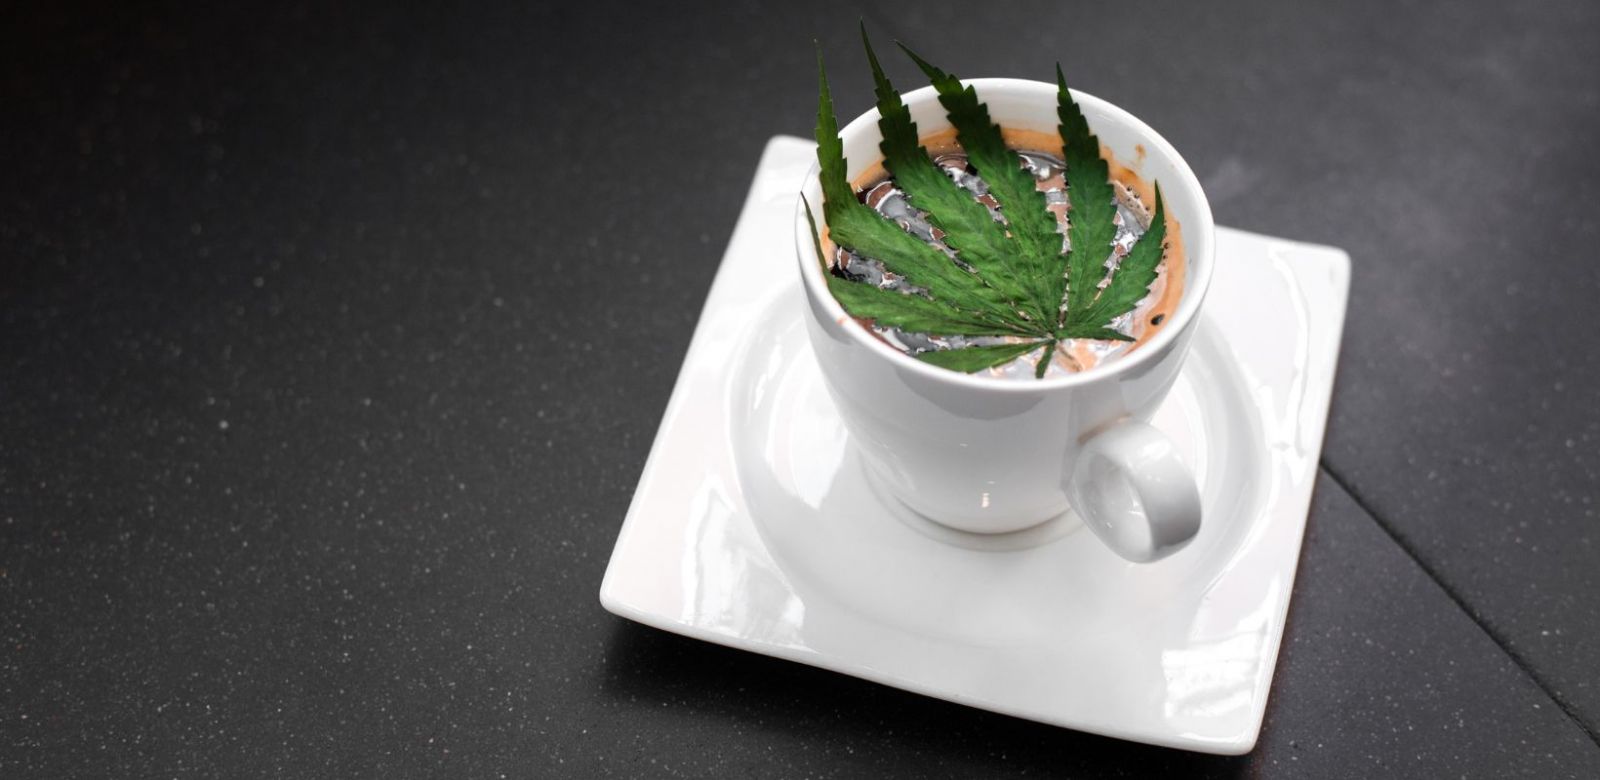 Photo for: Best Infused-CBD Coffee Beverages